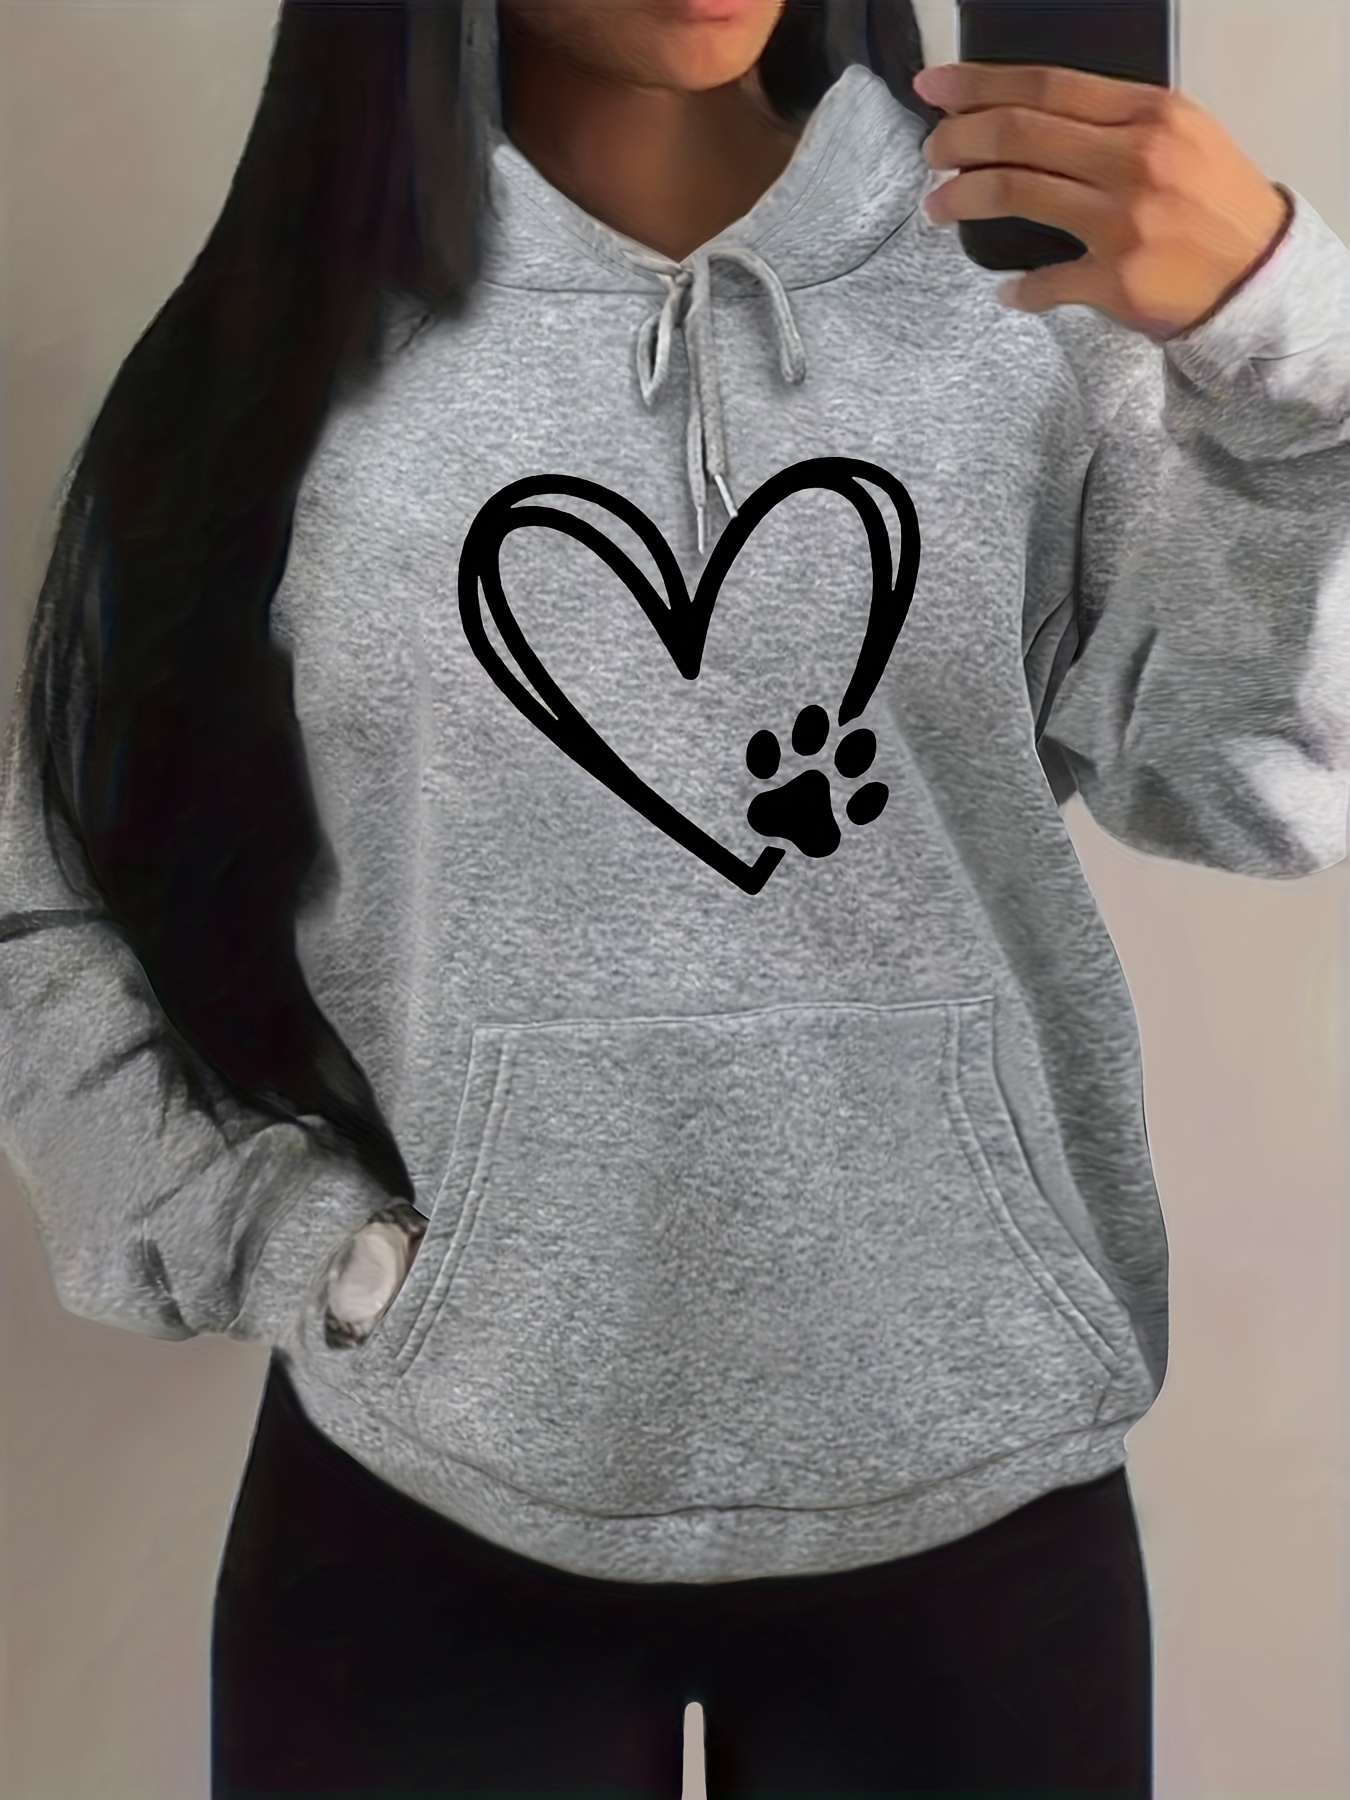 Dog Paw Heart Printed Sweatshirts for Women Waffle Knit Cute Hoodies  Drawstring Pullover Tops Comfy Fall Clothes Outfits